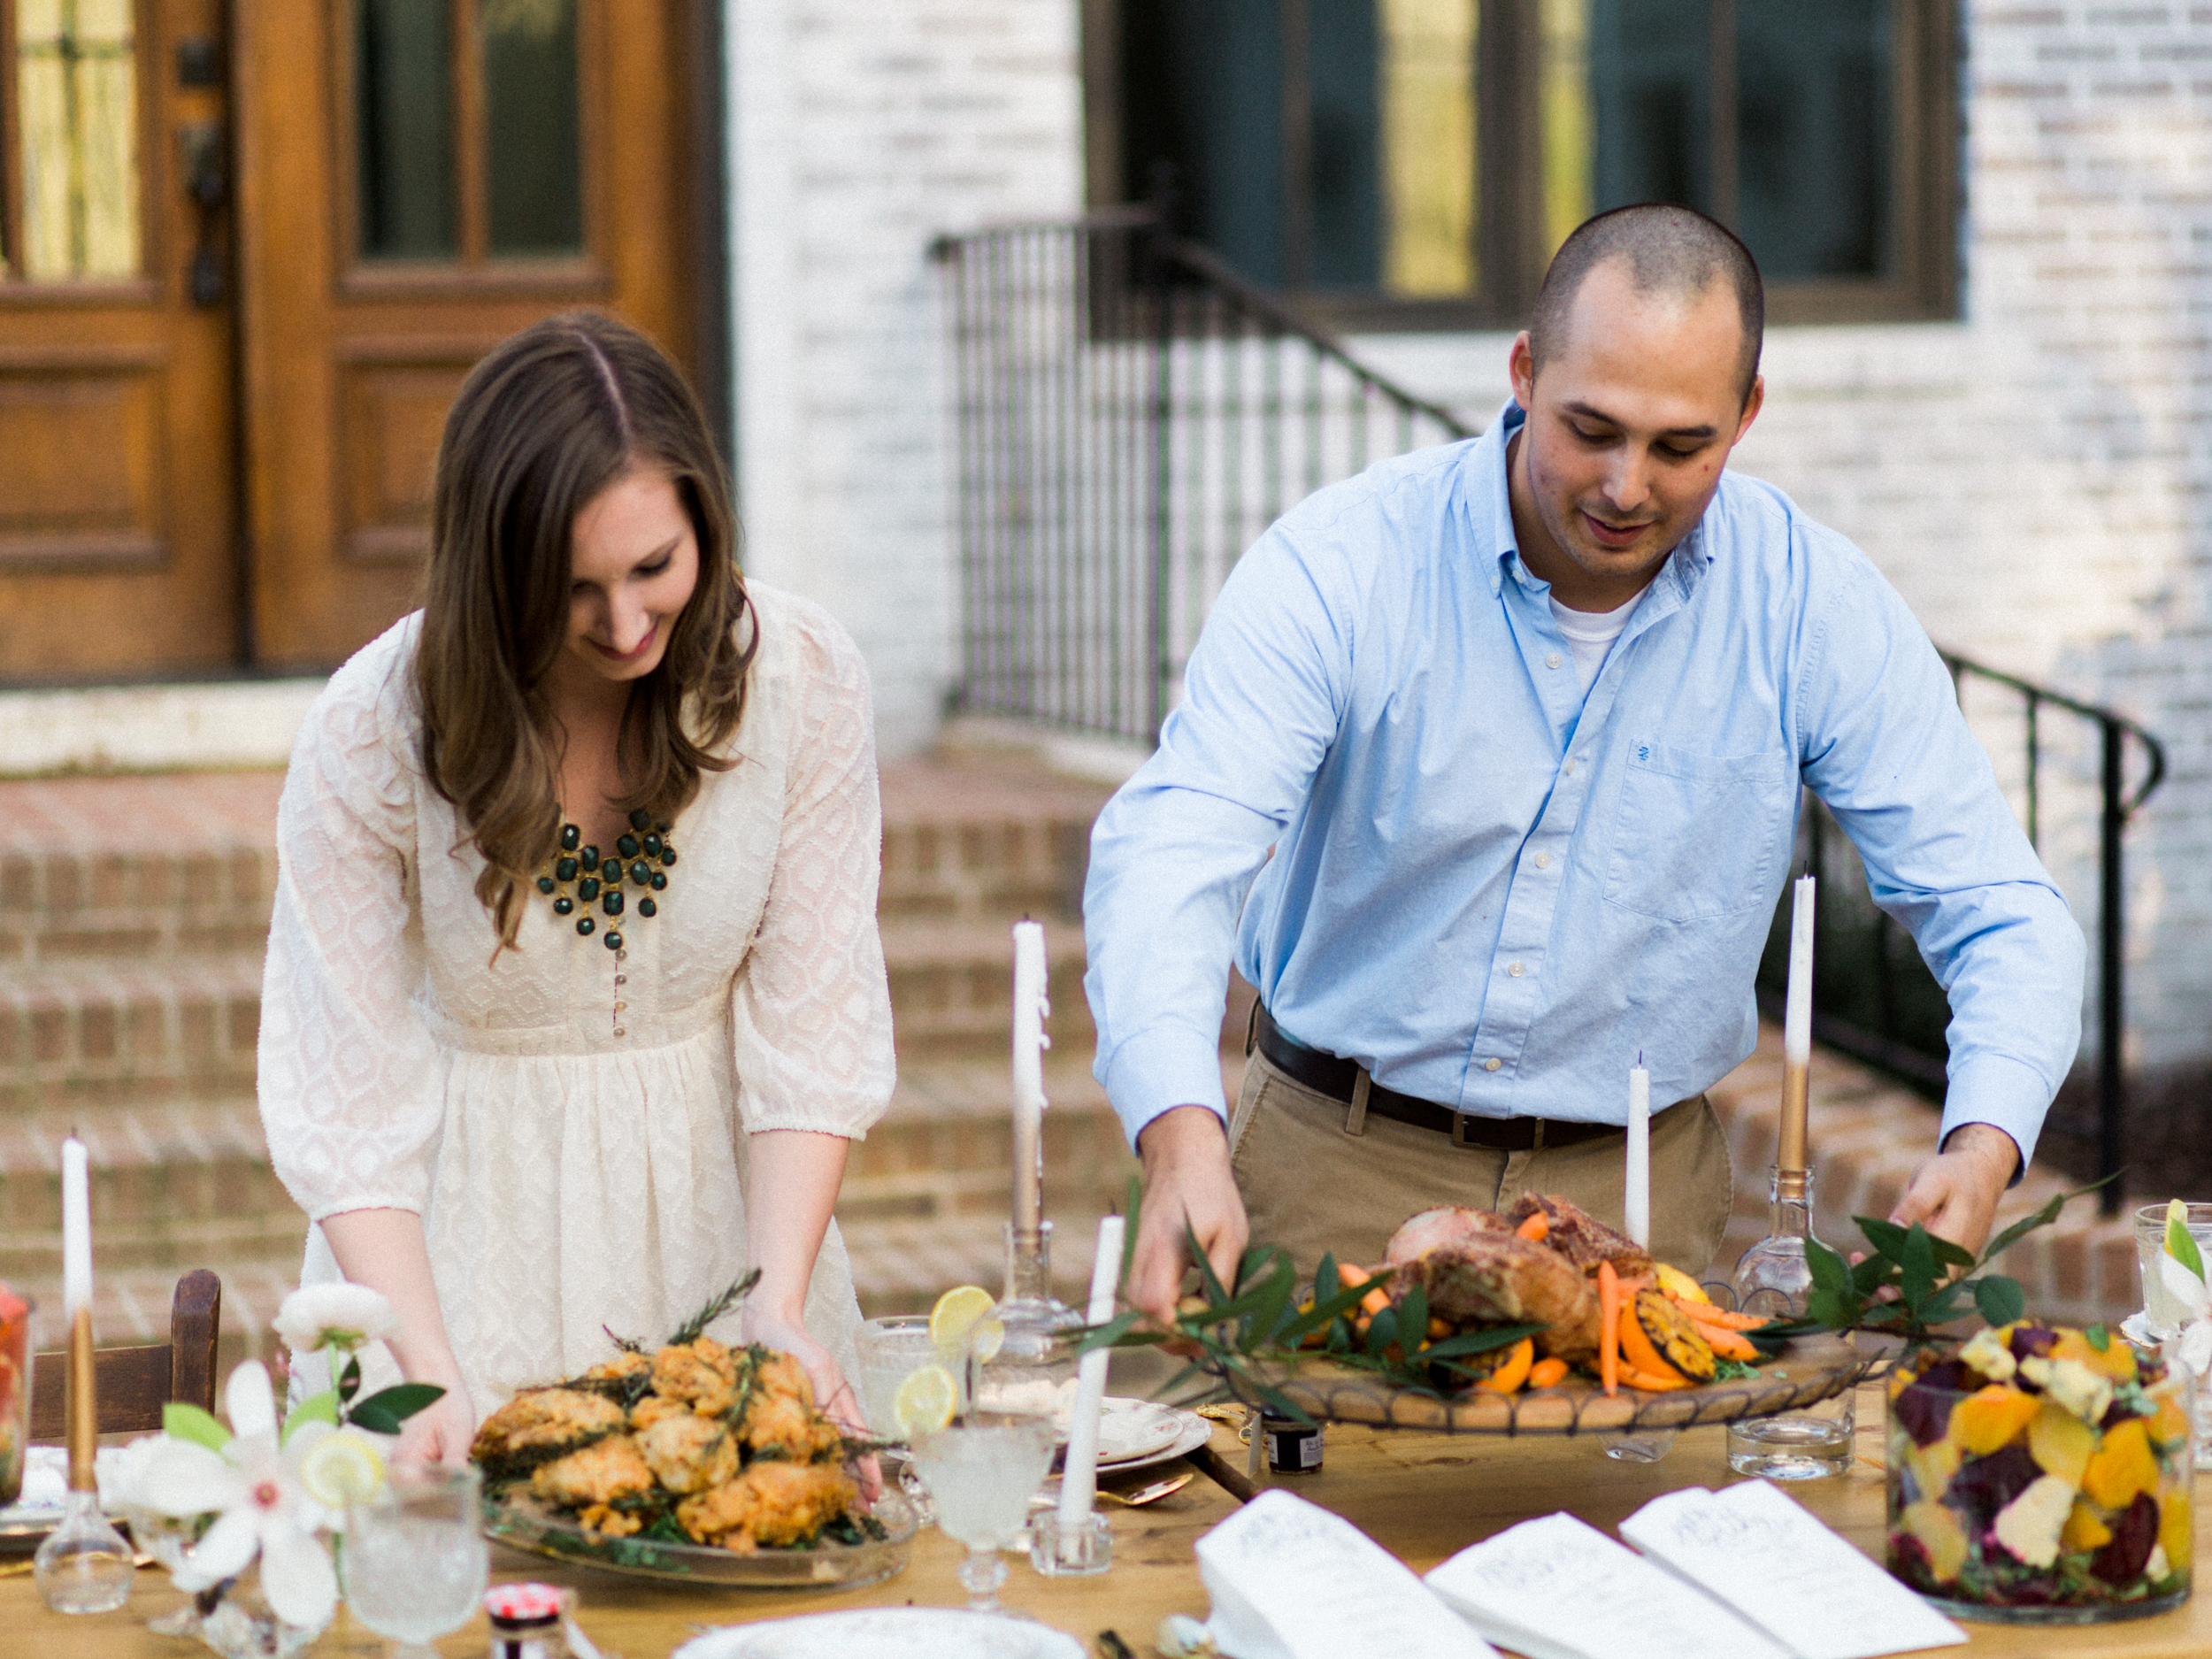 Outdoor Styled Southern Dinner Party - Behind-the-Scenes of a Styled Shoot